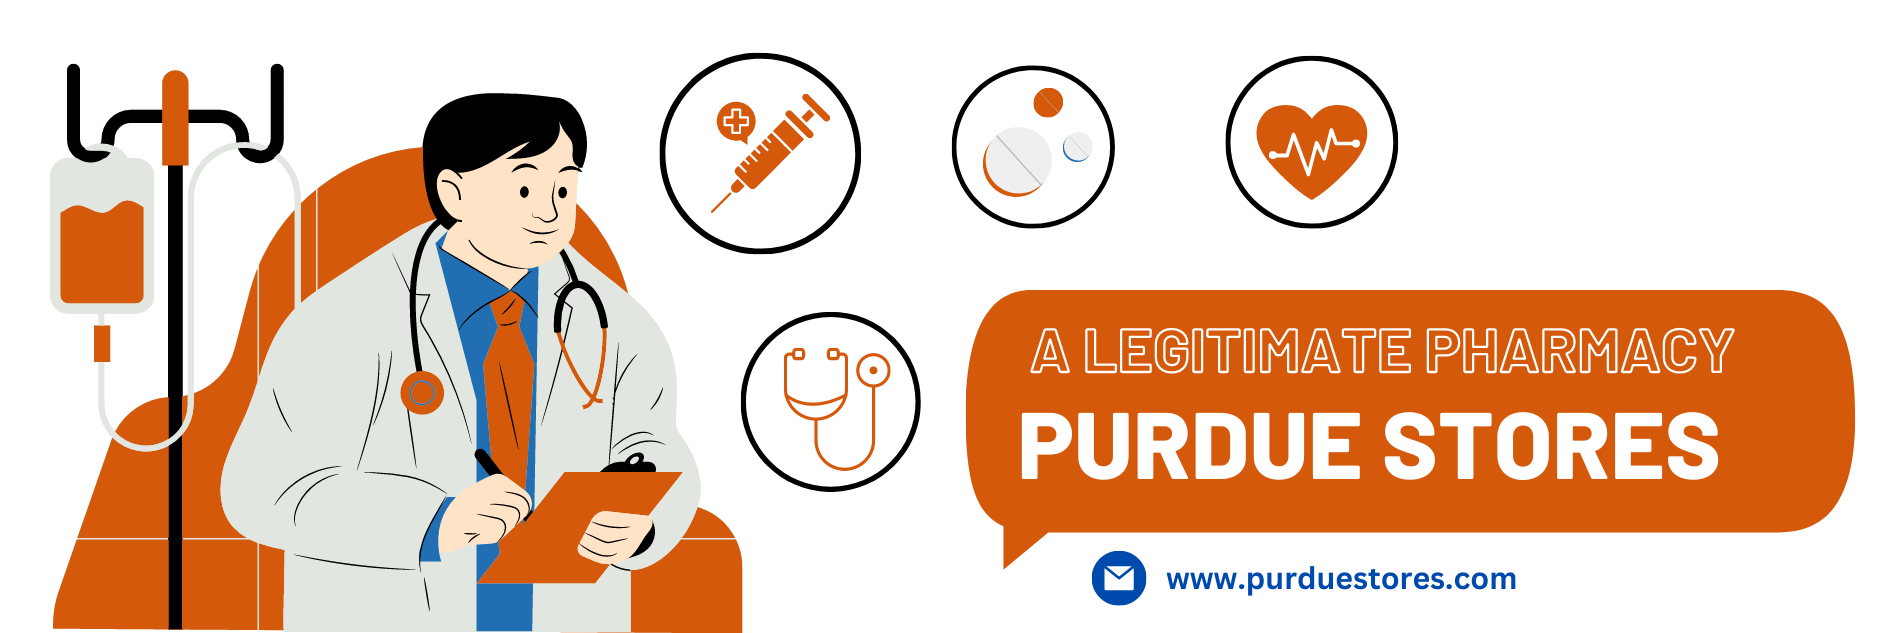 About Us: Purdue Stores - Legitimate Pharmacy and Health Information